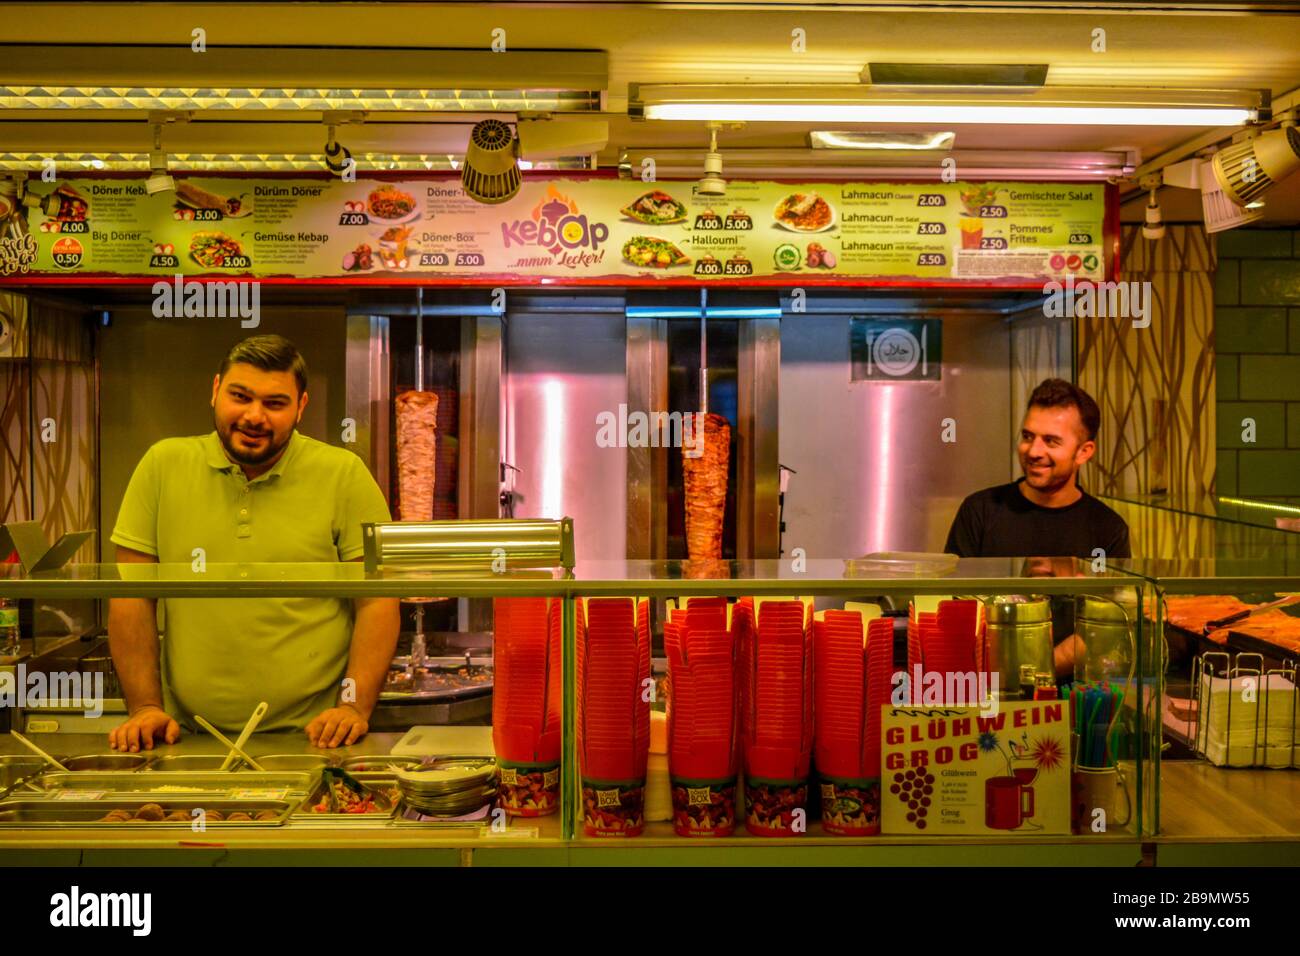 Berlin,Germany 02/02/20: Two people smile at a Doner Kebap fast food. Turkish shop in the U-Bahn subway of Alexanderplatz station with 2 happy workers Stock Photo